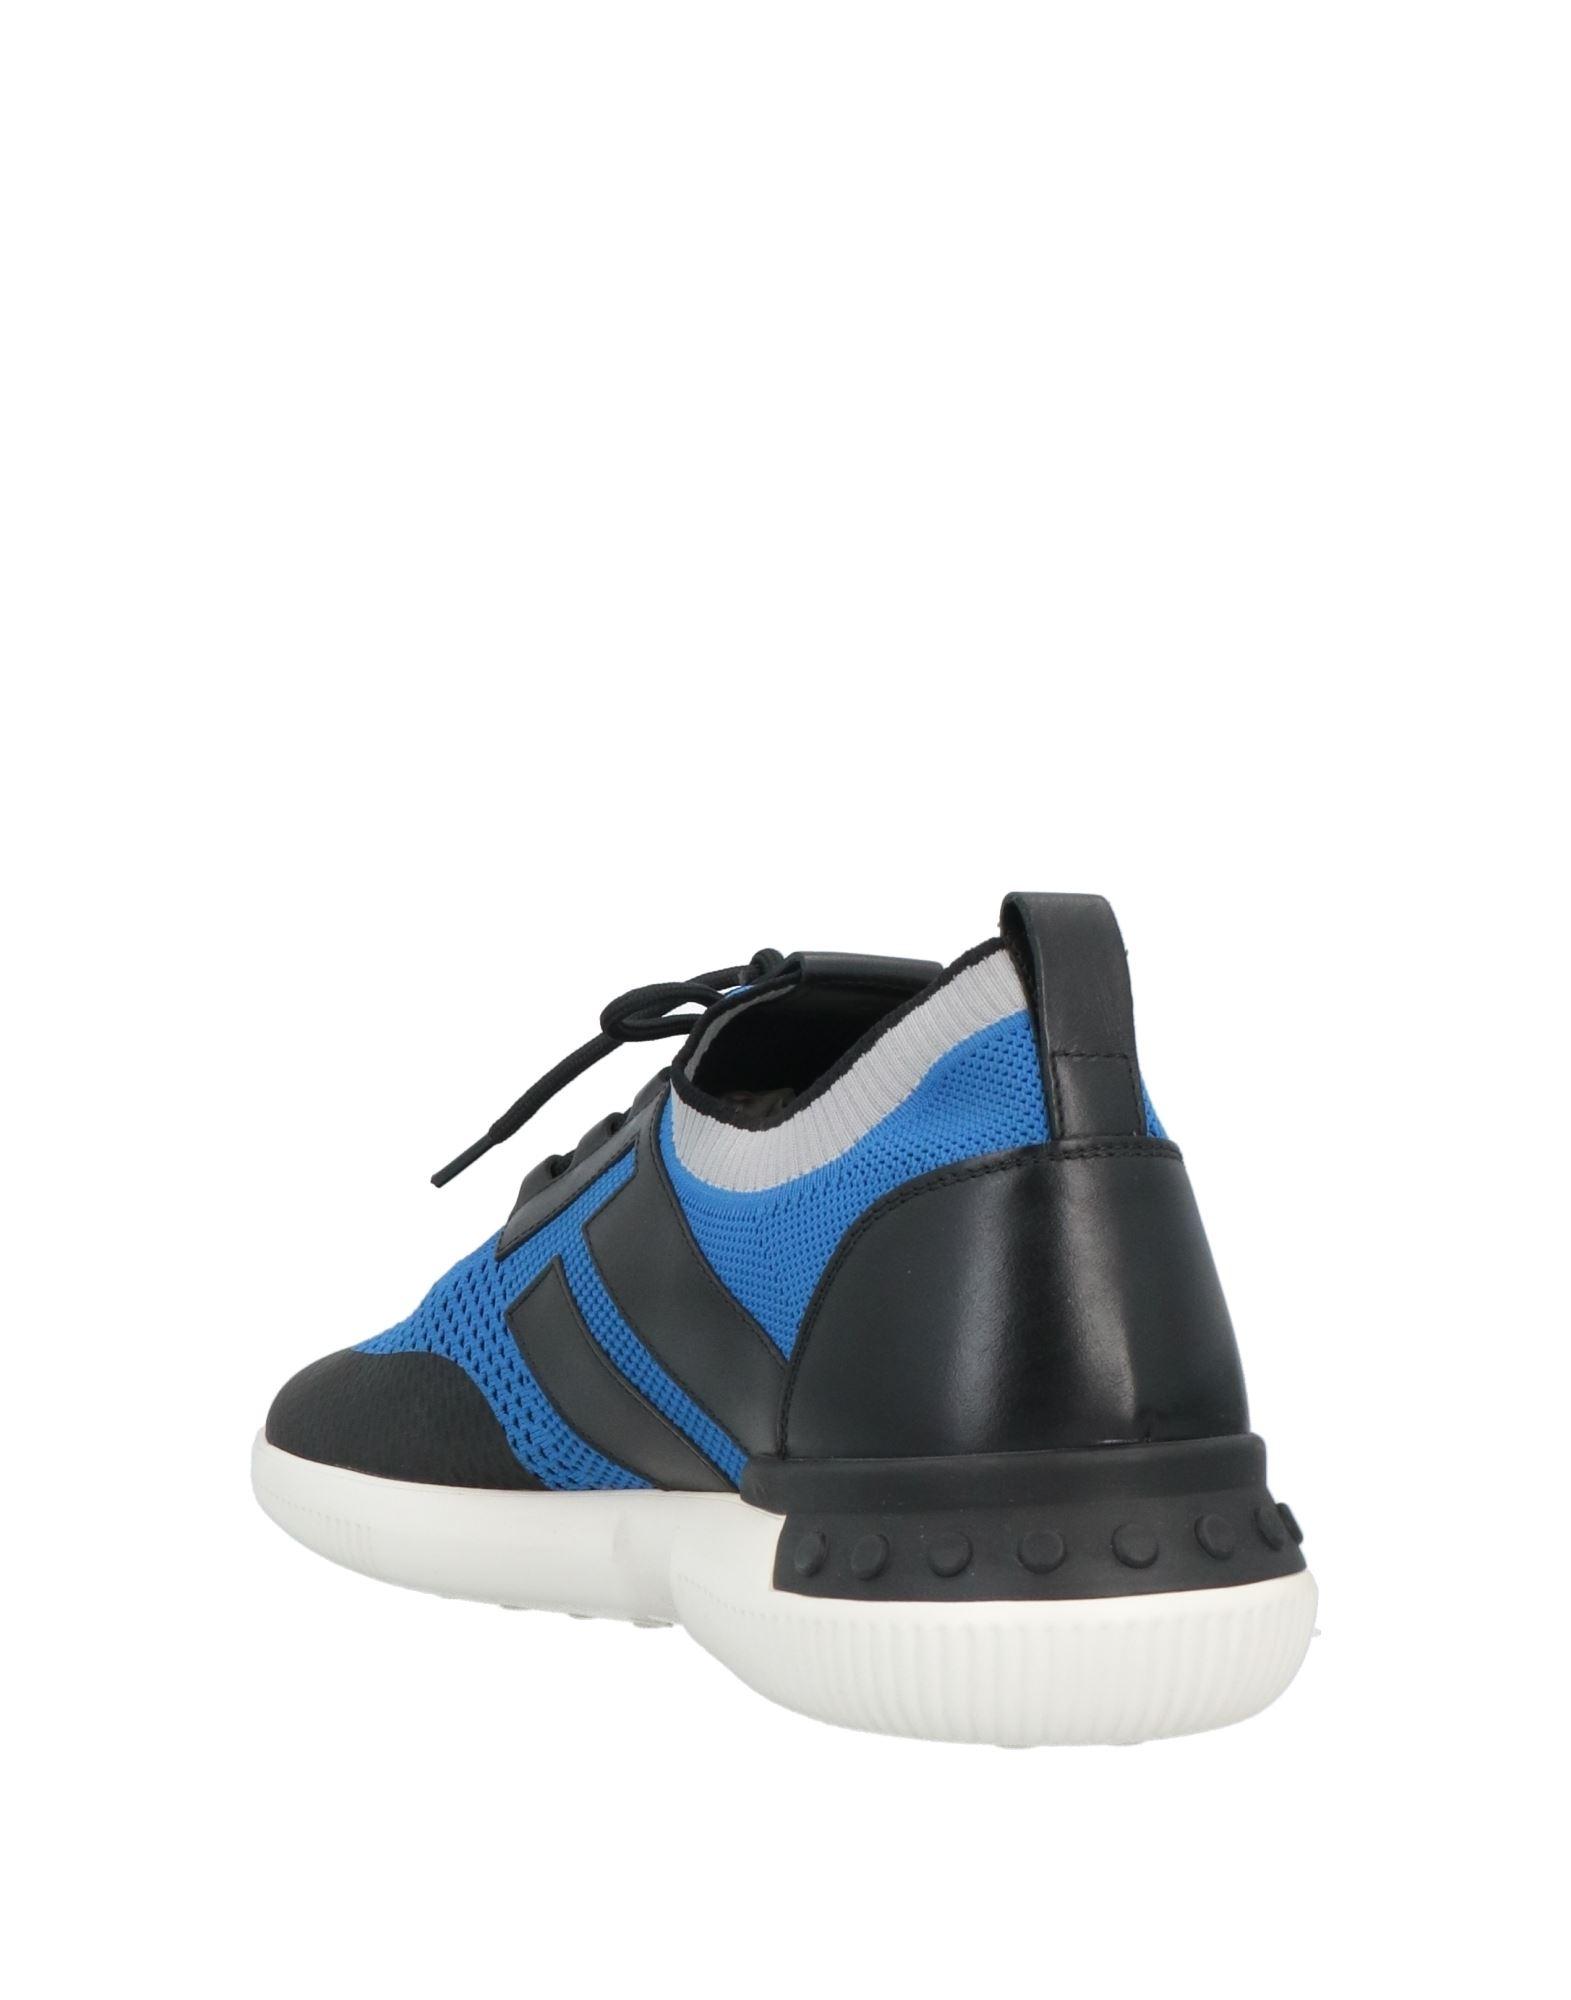 Tods Men's Lace Up Active Trainer Sneaker